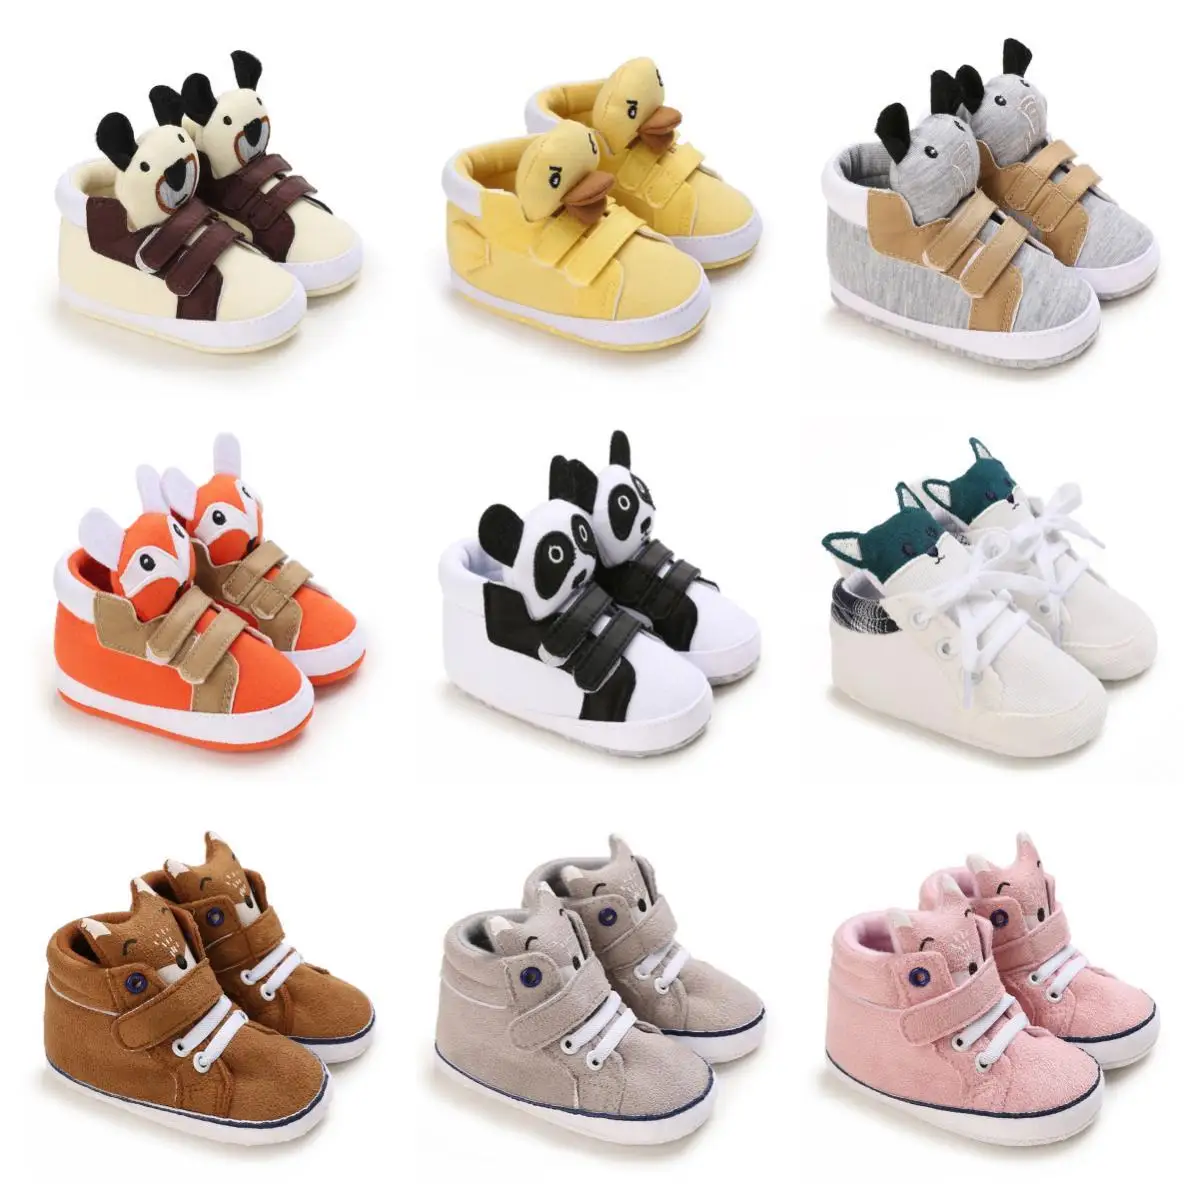 Classic Baby Shoe Boy Girl Baby Cute Animal Face Casual Flat Sneaker First Baby Ankle Boot Cotton Non-slip Warm Walking Shoes funny pug dogs cute animal print newborn baby boy clothes summer casual home pajamas baby girl bodysuits aesthetic harajuku